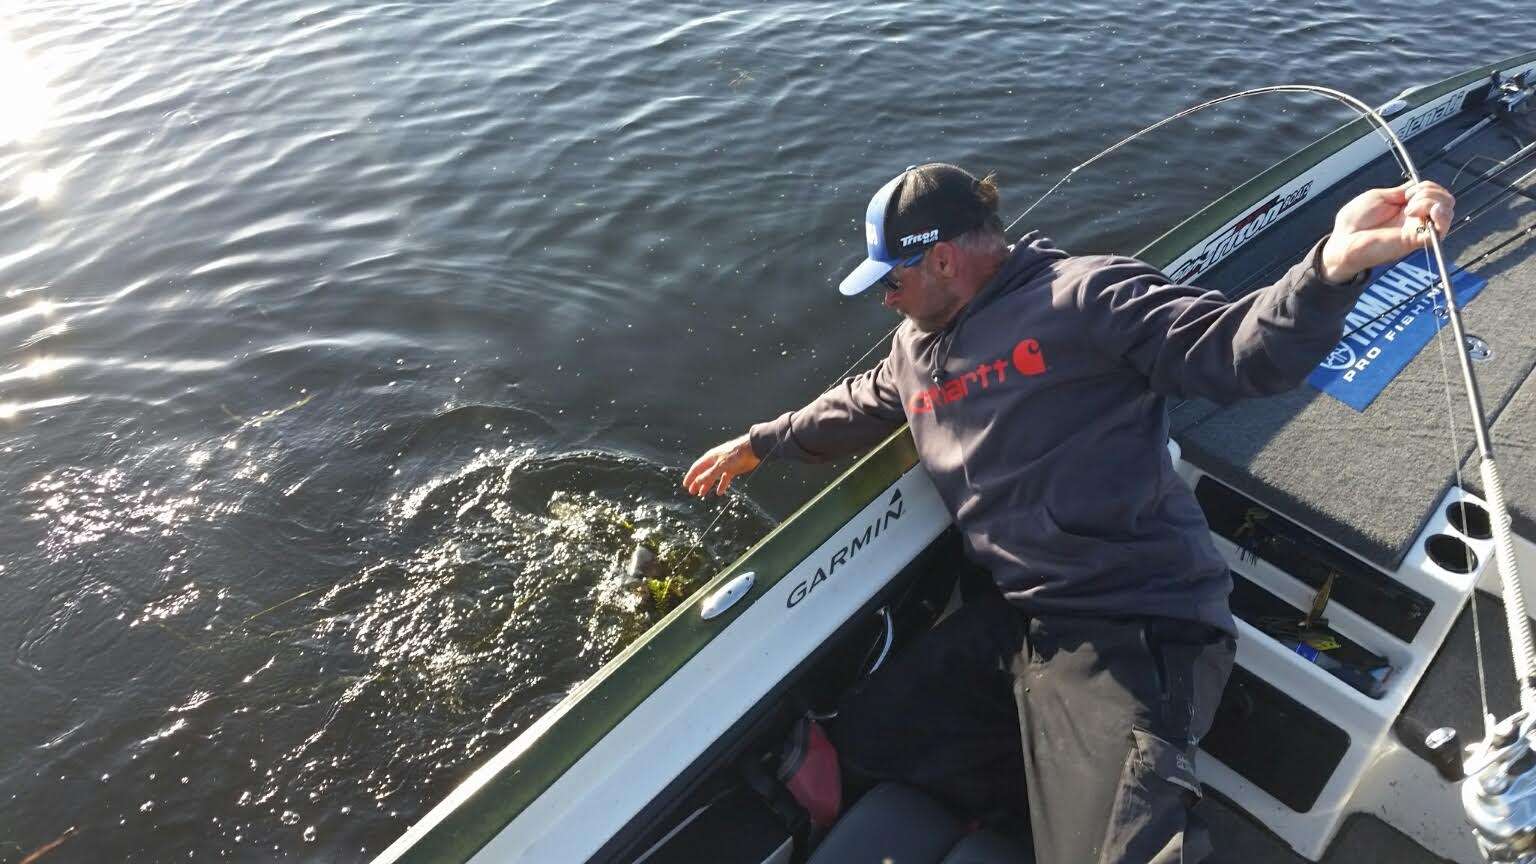 Jeff Kreit working a fish into the boat...